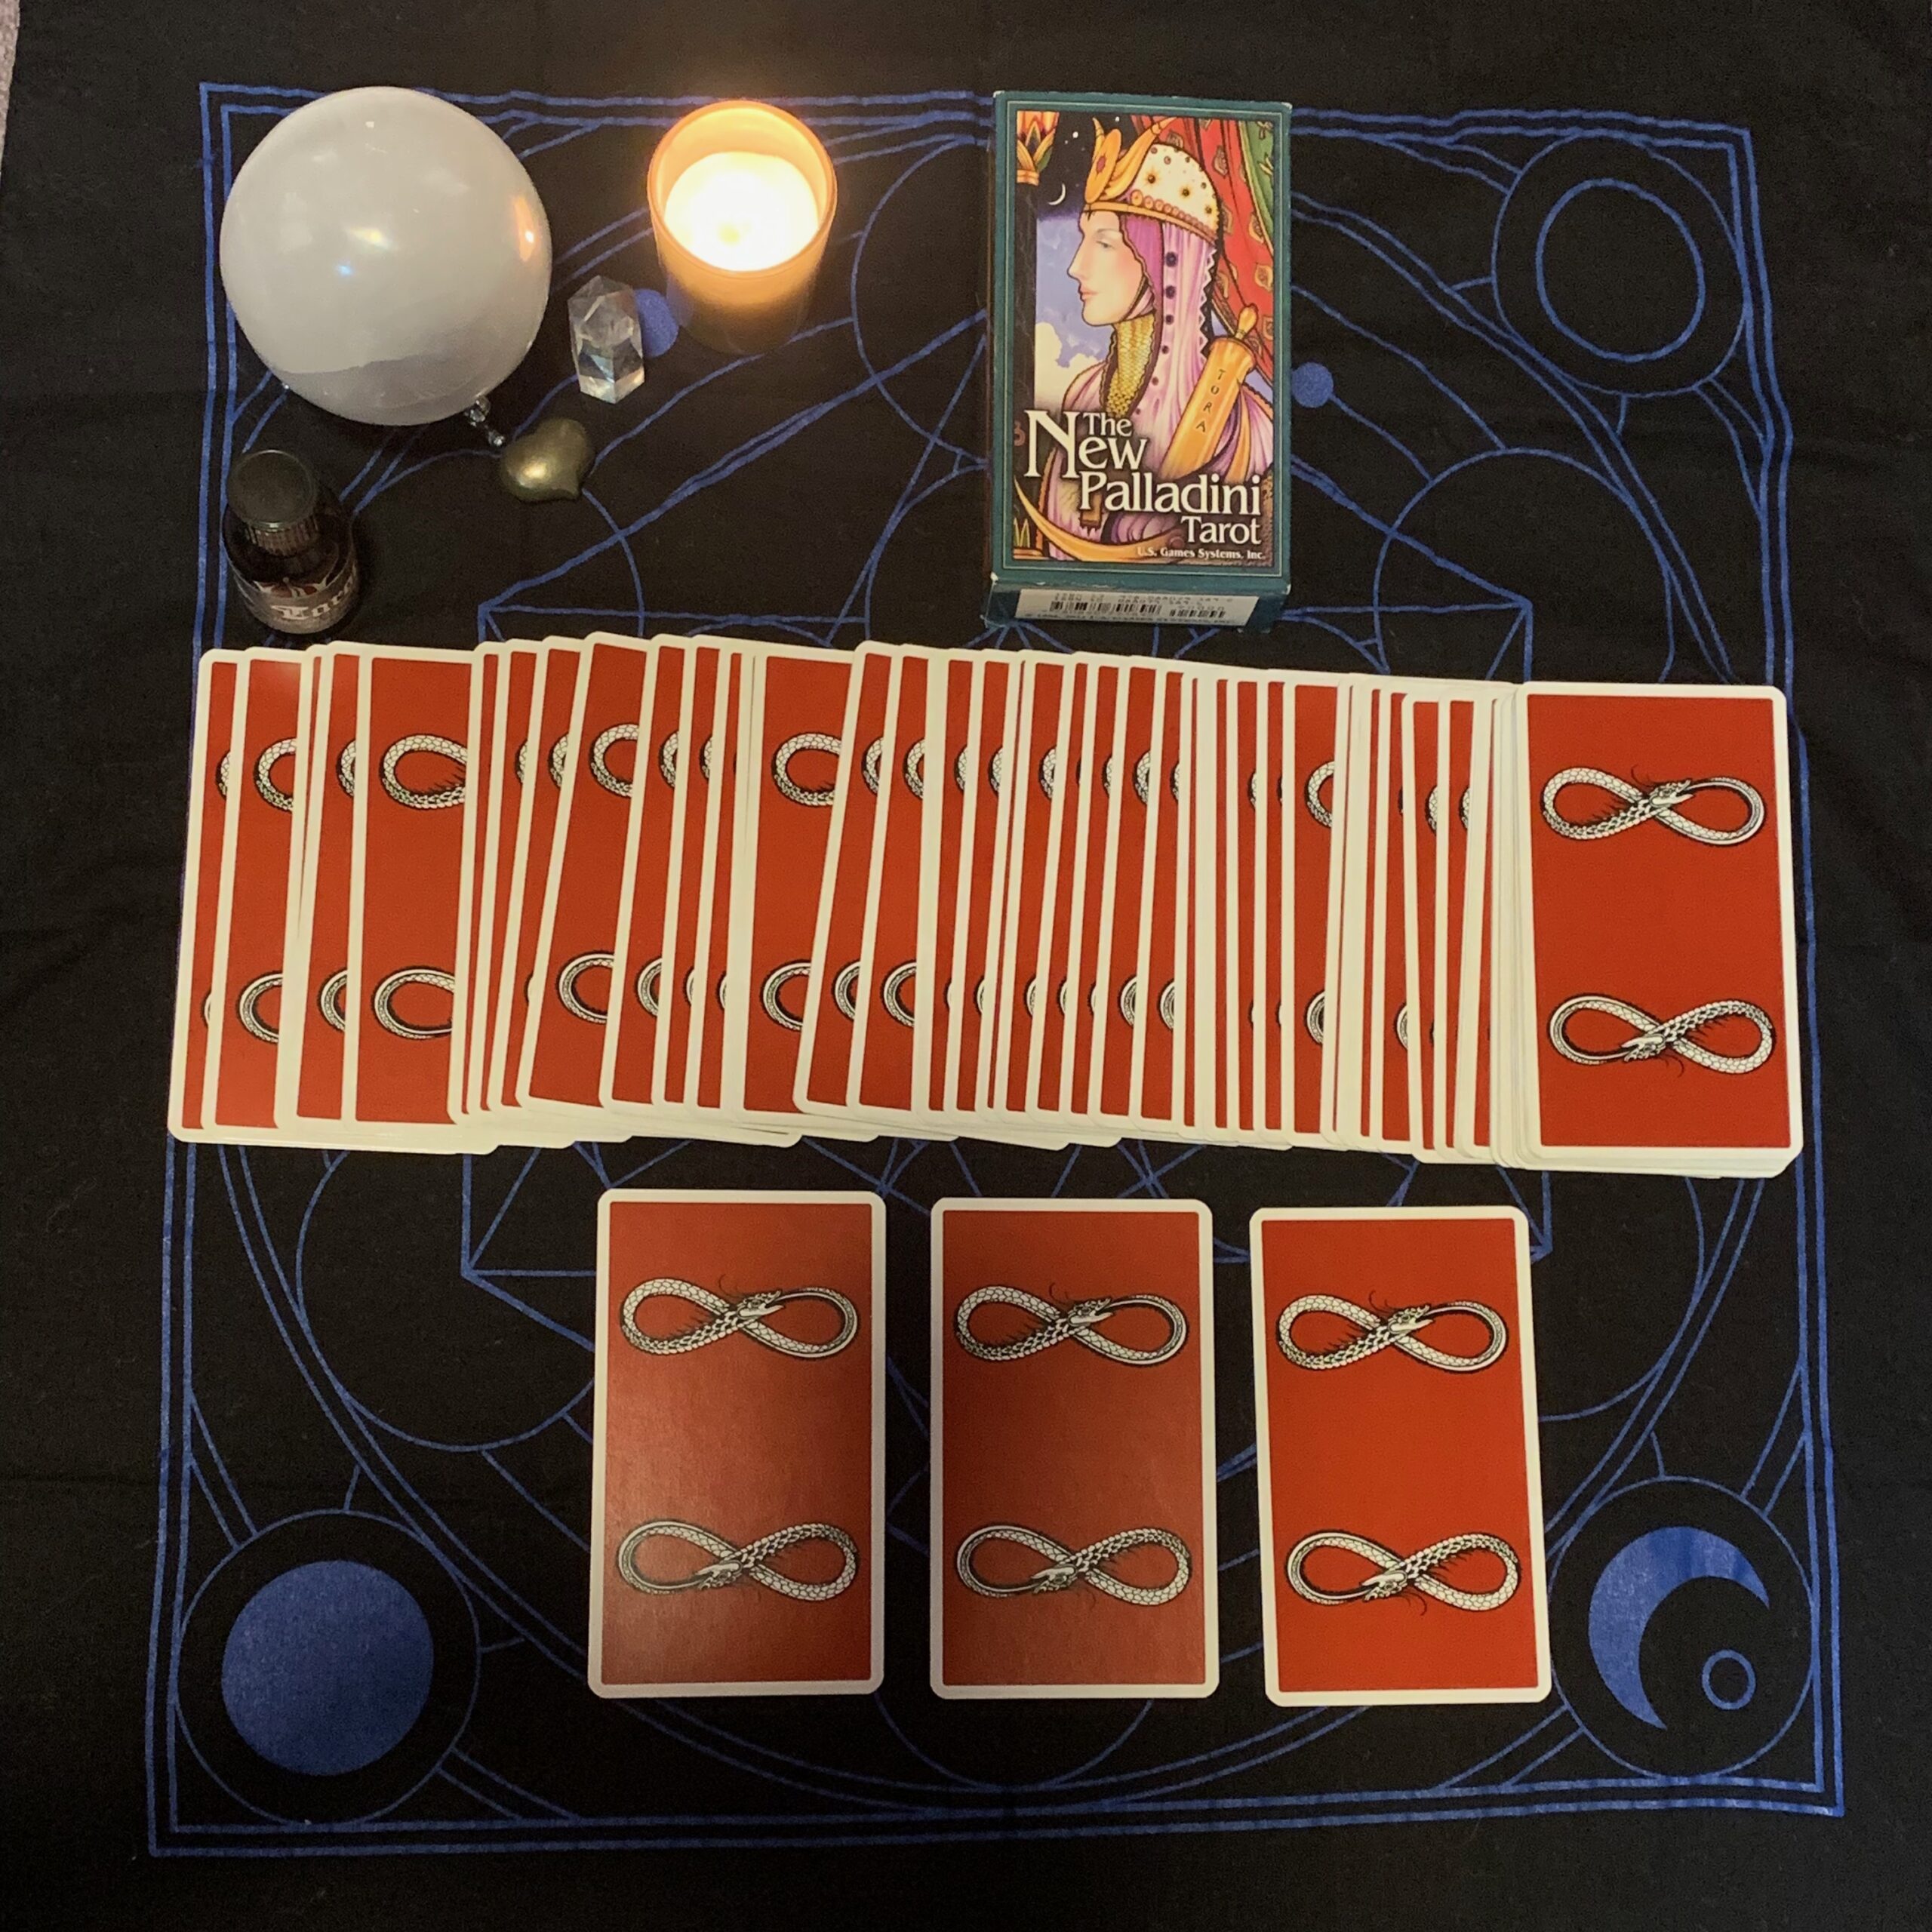 tarot reading scene. card backs of The New Palladini Tarot featuring a snake eating it's tail in the shape of the infinity symbol